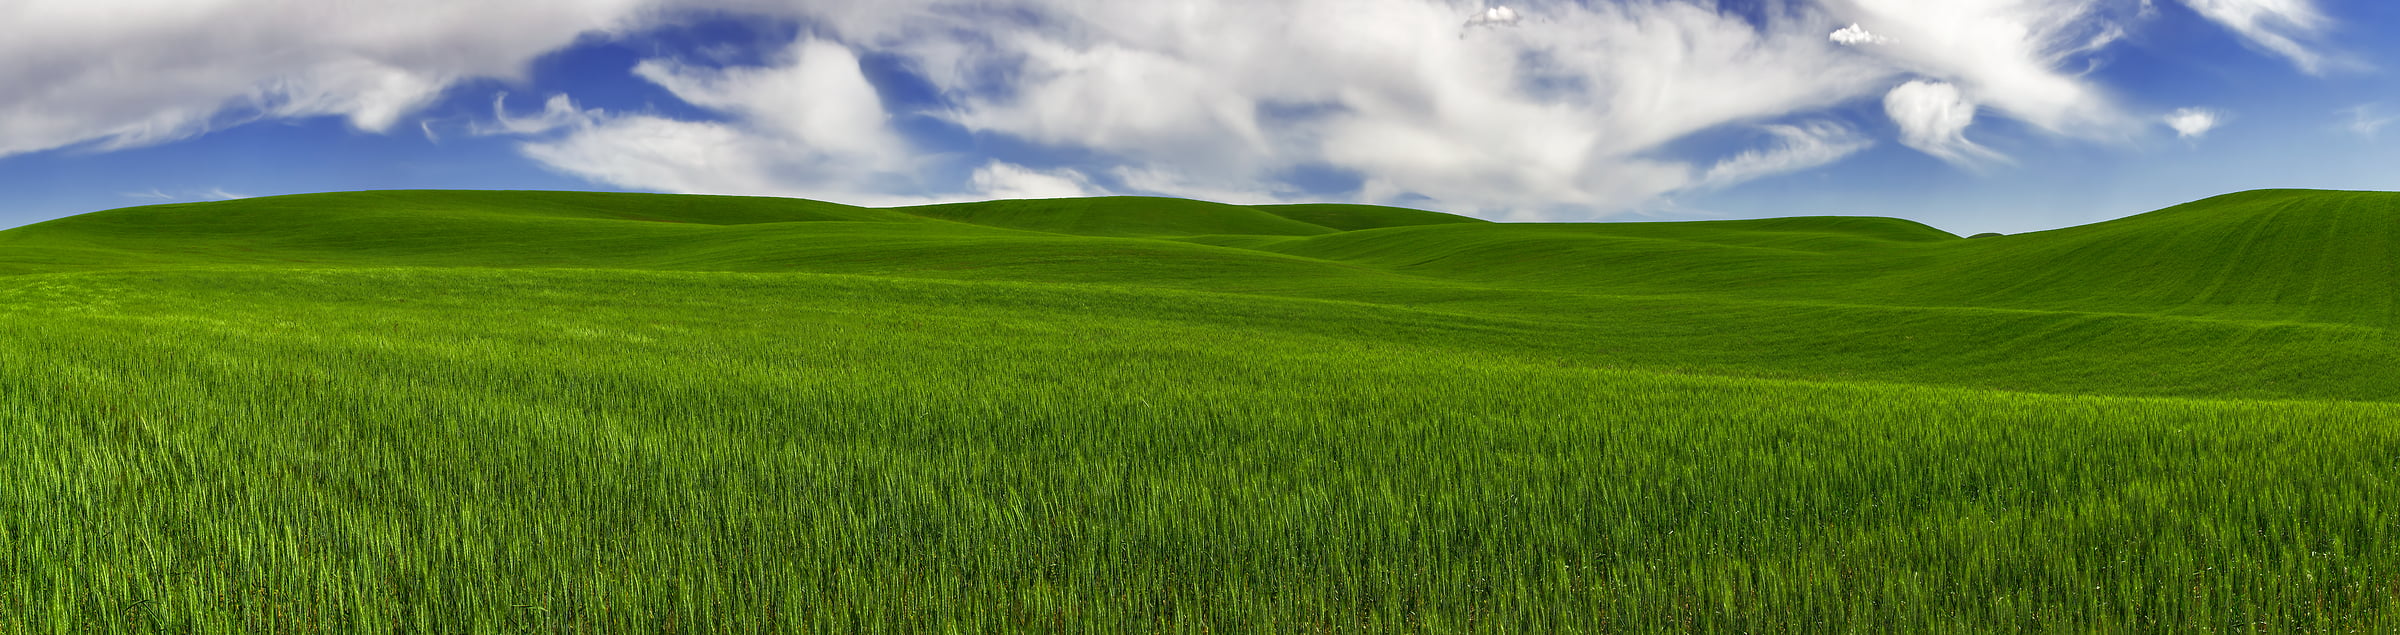 126 megapixels! A very high resolution, large-format VAST photo print of hills and green fields; landscape photograph created by Chris Collacott in Palouse, WA, USA.